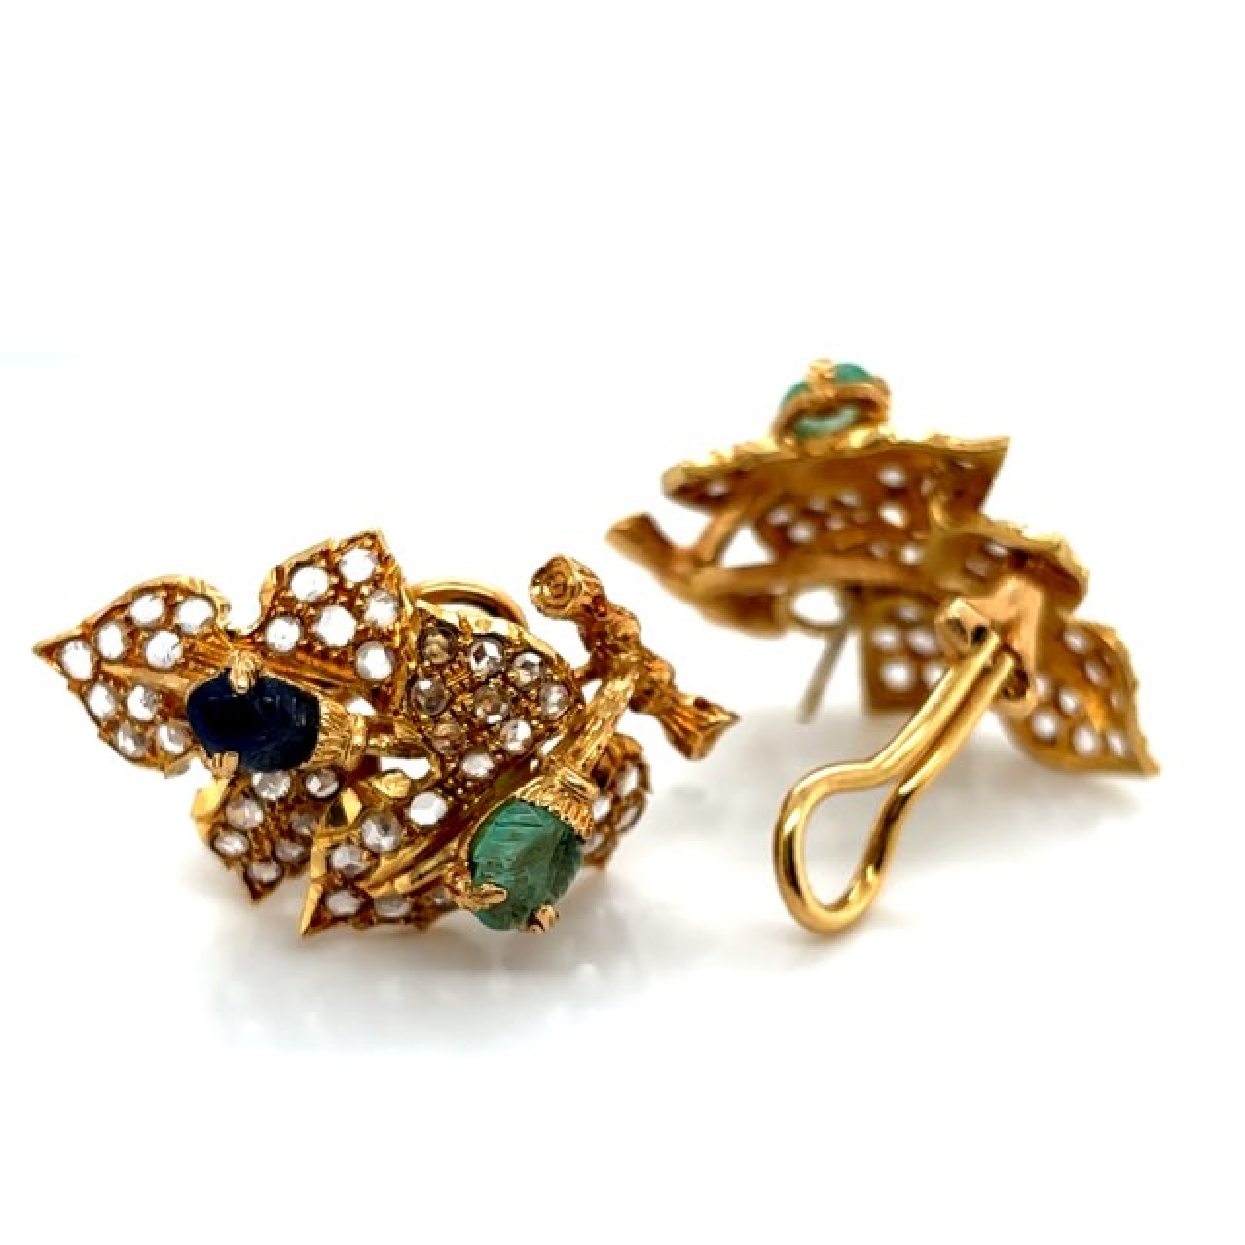 18K Yellow Gold Buccelati Earrings with Rose Cut Diamonds and Carved Emerald and Sapphire Accents with Omega Backs
